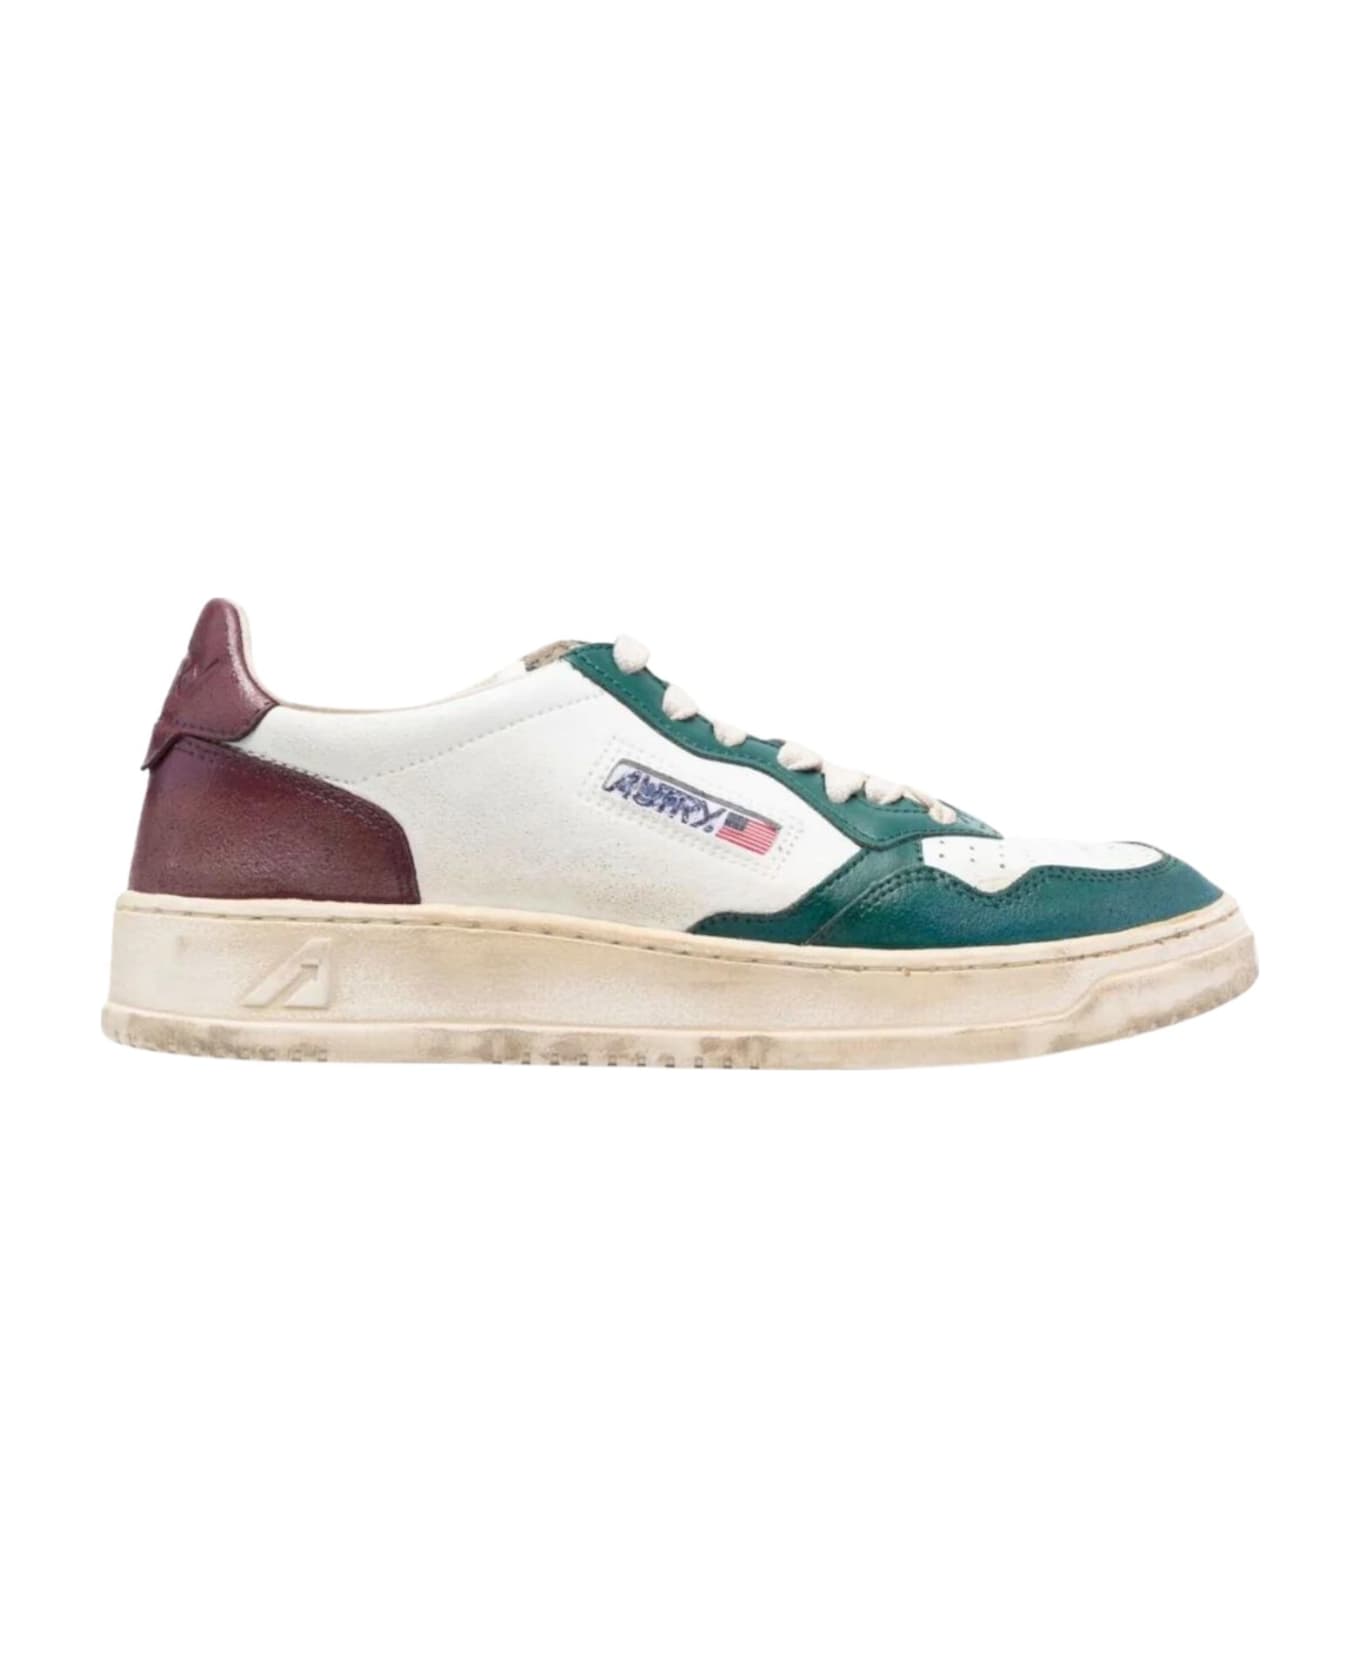 Autry Sup Vint Low Wom Sneakers - White Bordeaux Green スニーカー